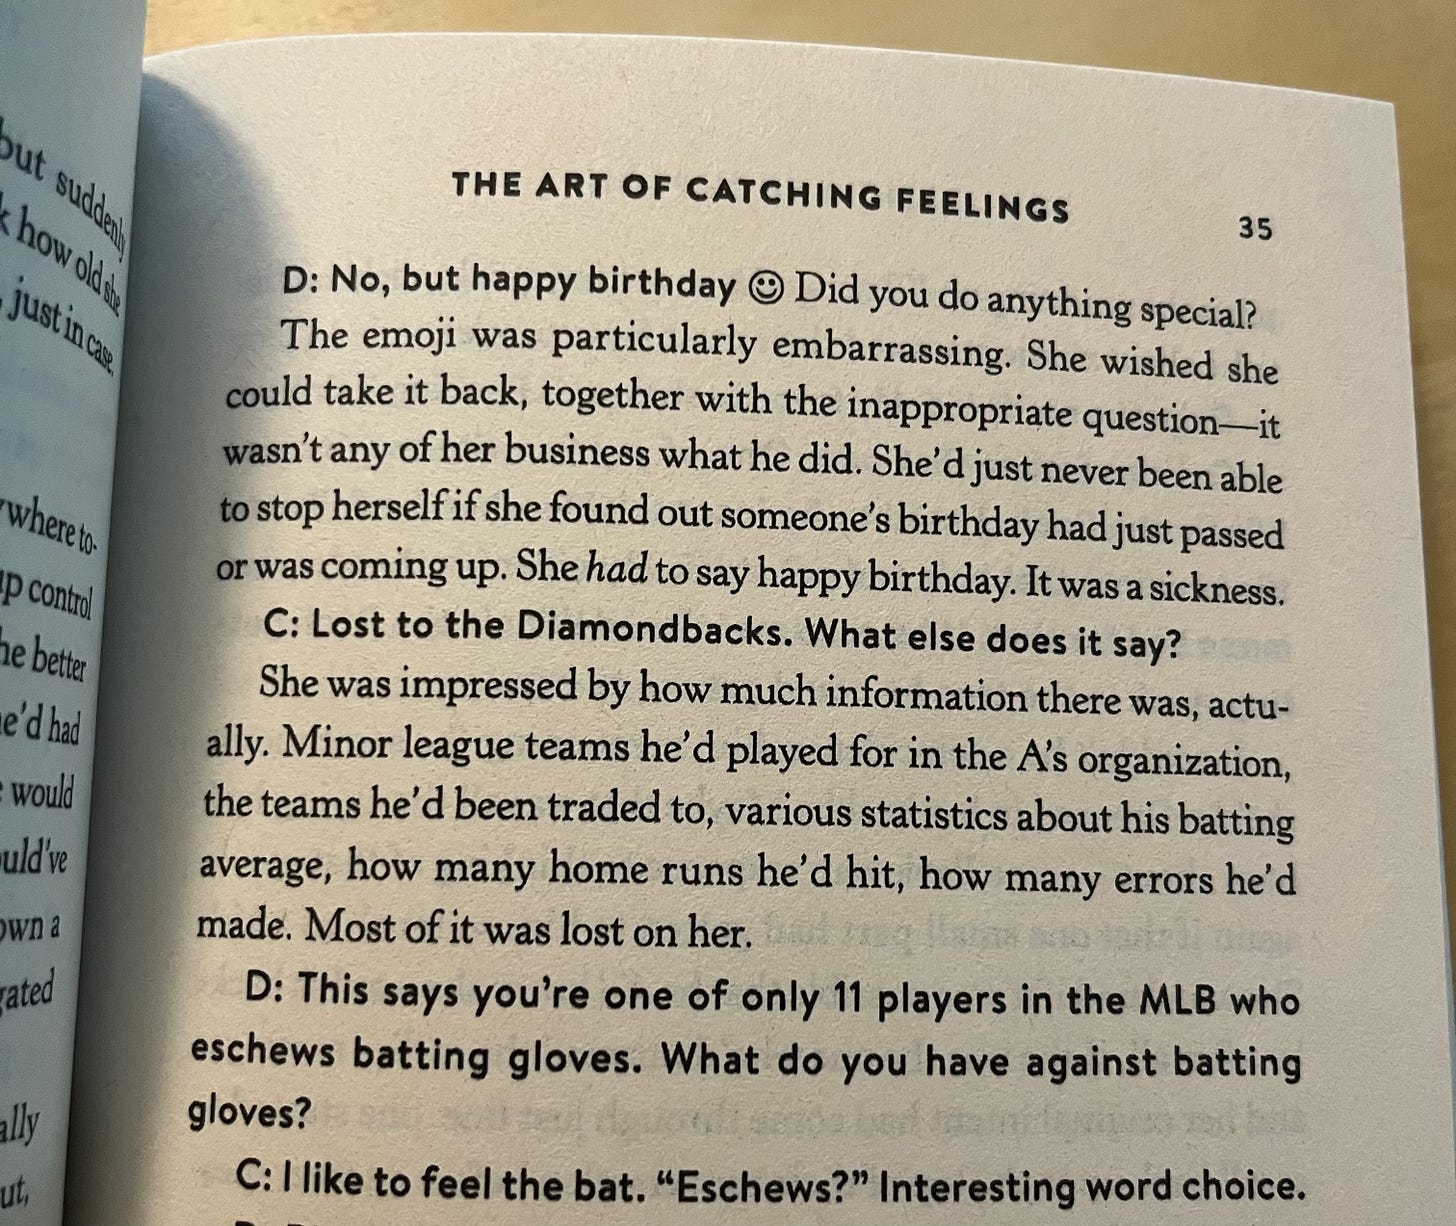 Picture of page from THE ART OF CATCHING FEELINGS that says: "D: No, but happy birthday :) Did you do anything special./ The emoji was particularly embarrassing. She wished she could take it back, together with the inappropriate question -- it wasn't any of her business what he did. She'd jut never been able to stop herself if she found out someone's birthday had just passed or was coming up. She HAD to say happy birthday. It was a sickness. / C: Lost to the Diamondbacks. What else does it say? / She was impressed by how much information there was, actually. Minor league teams he'd played for in the A's organization, the teams he'd been traded to, various statistics about his batting average, how many home runs he'd hit, how many errors he'd made. Most of it was lost on her. / D: This says you're one of only 11 players in the MLB who eschew batting gloves. What do you have against batting gloves? C: I like to feel the bat. "Eschews?" Interesting word choice."